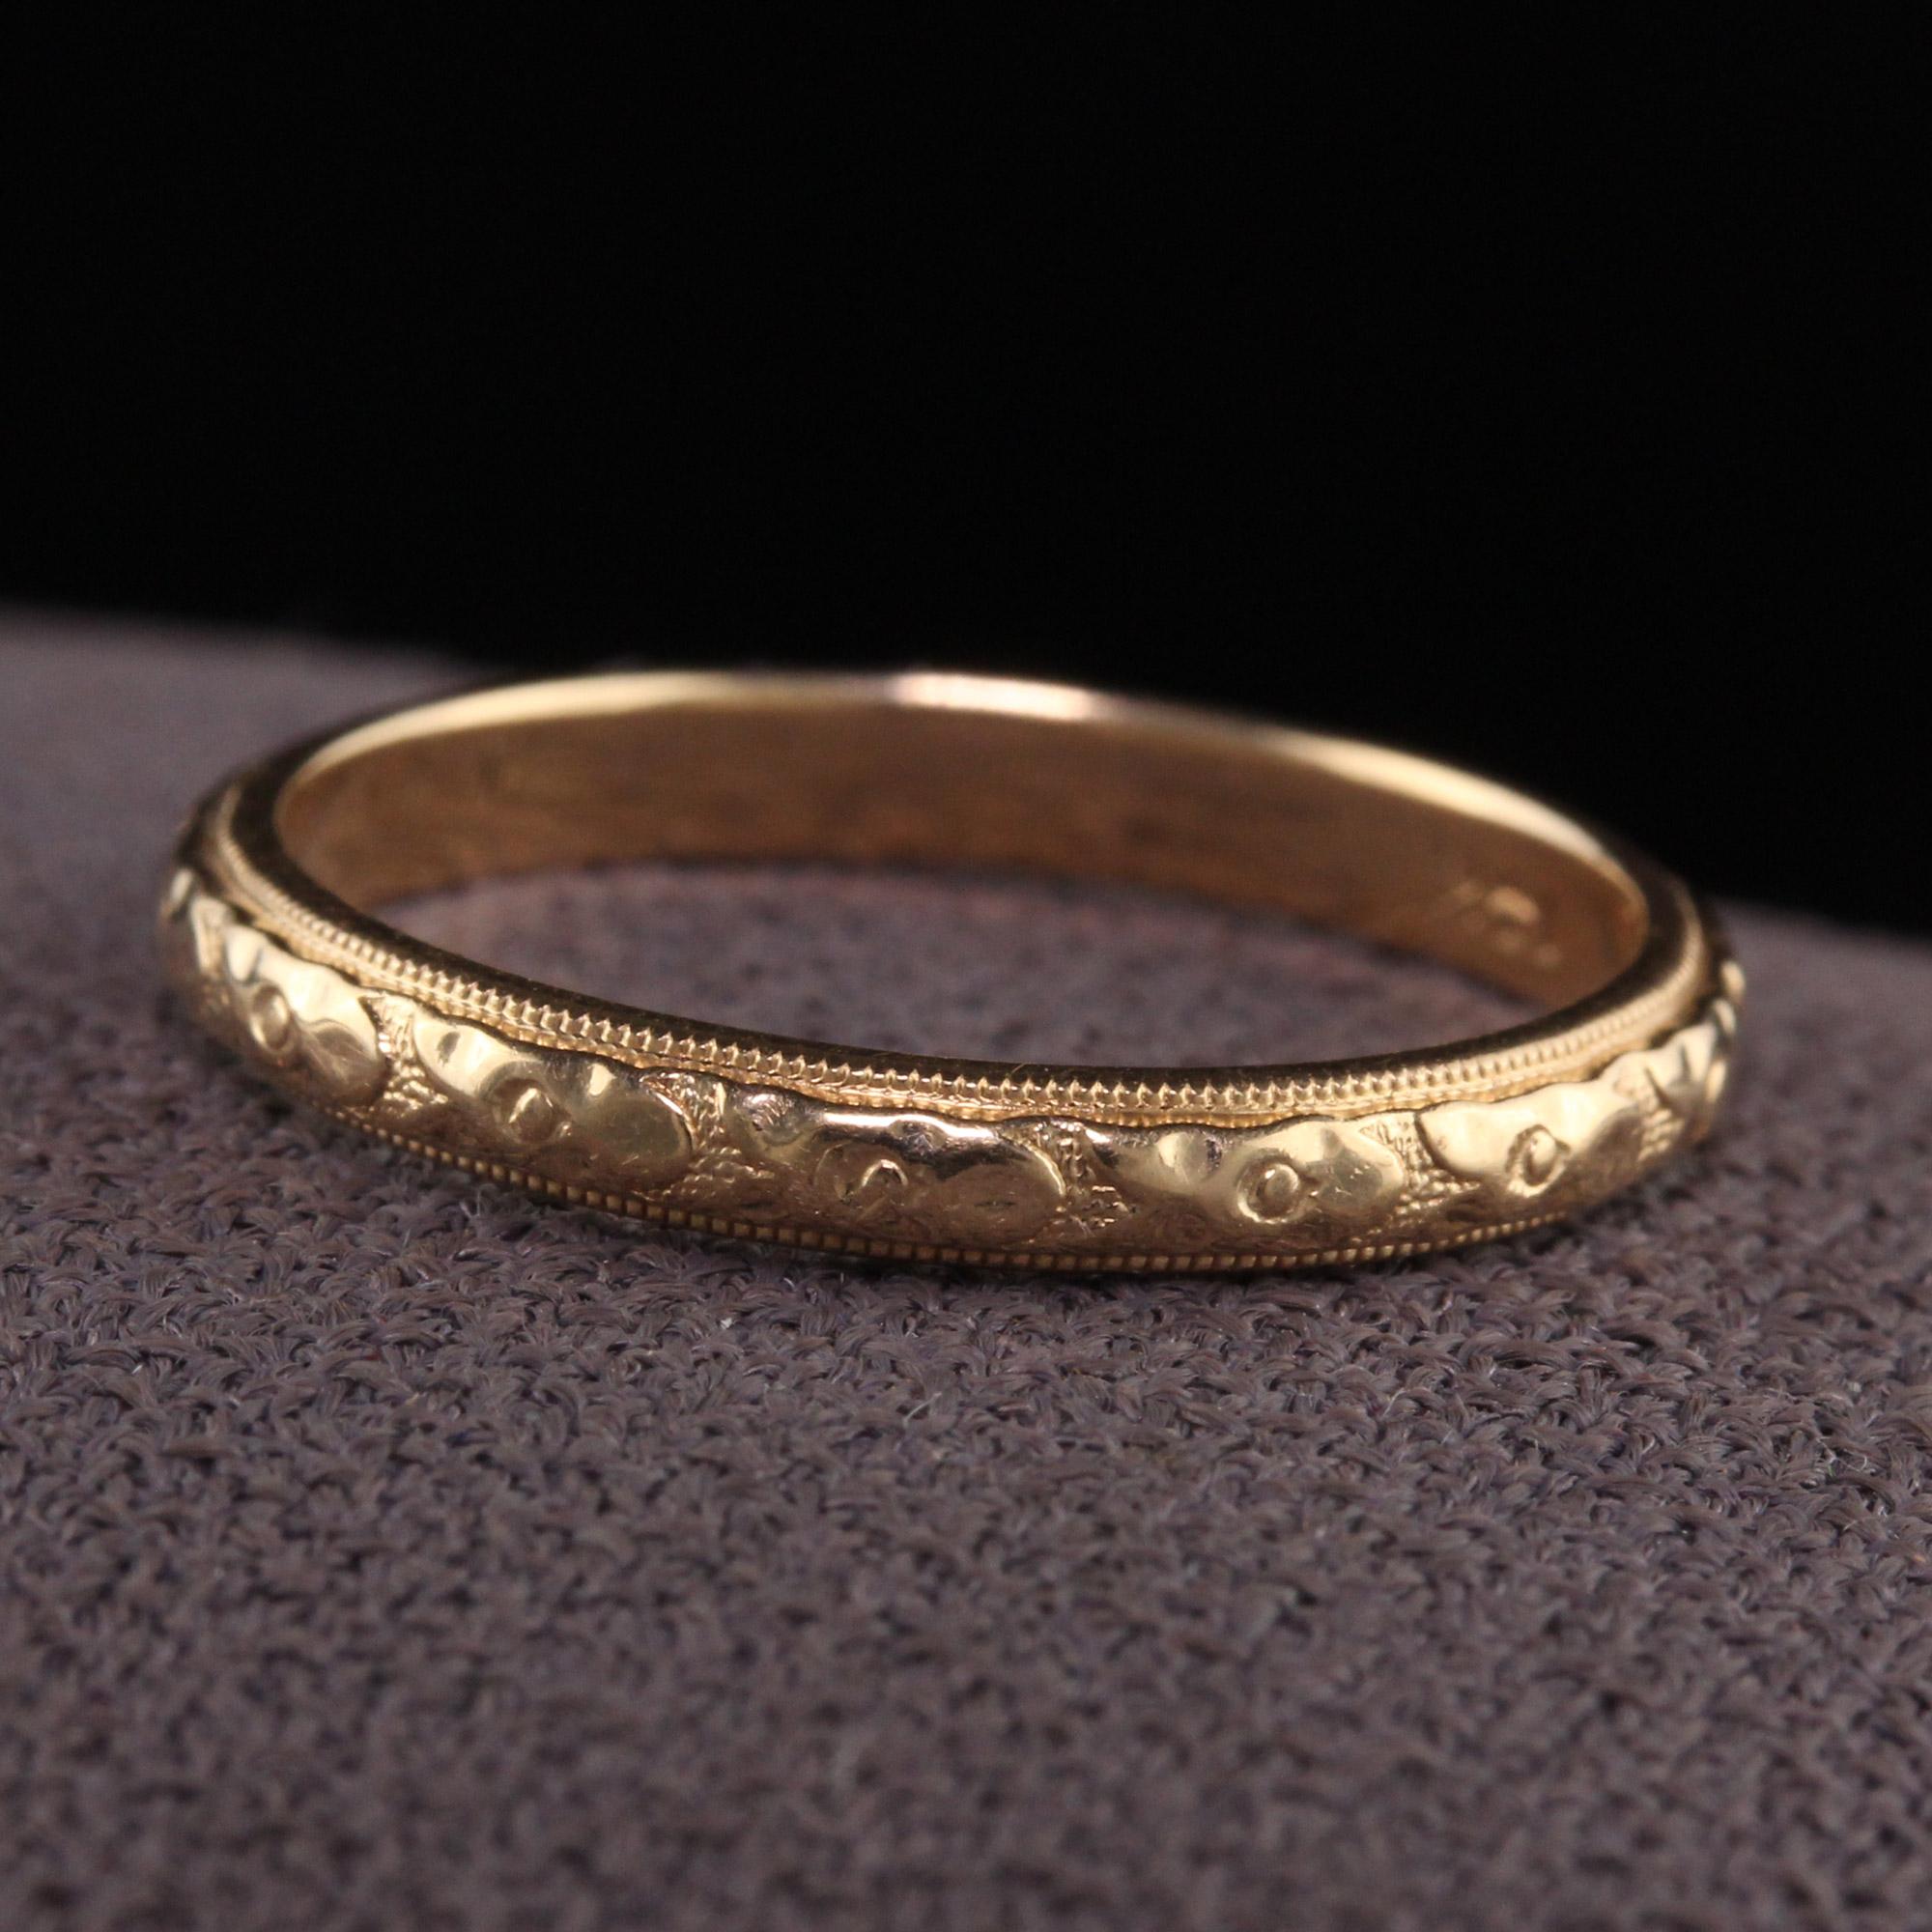 Beautiful Antique Antique Art Deco 14K Yellow Gold Engraved Wedding Band - Size 6 3/4. This amazing art deco wedding band is in great condition and has beautiful engravings going around the entire ring.

Item #R1026

Metal: 14K Yellow Gold

Weight: